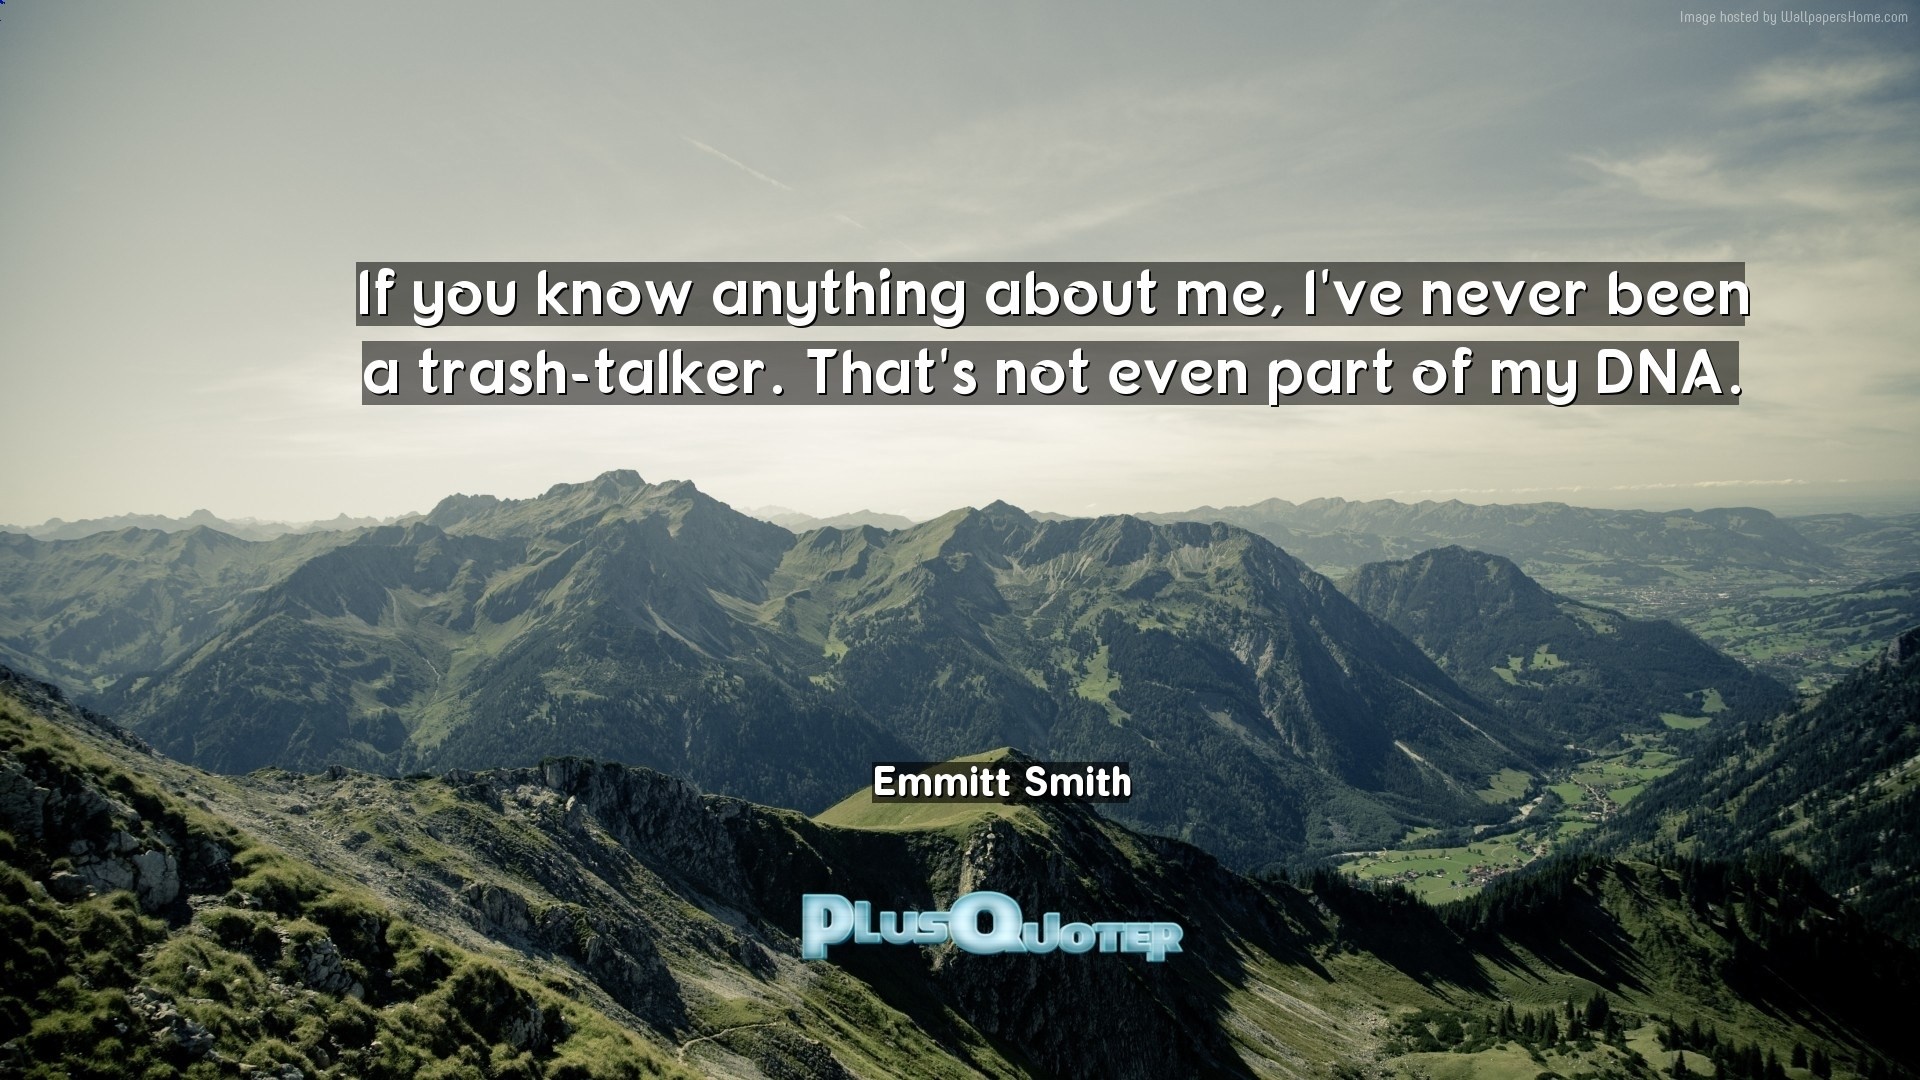 1920x1080 Download Wallpaper with inspirational Quotes- "If you know anything about  me, I